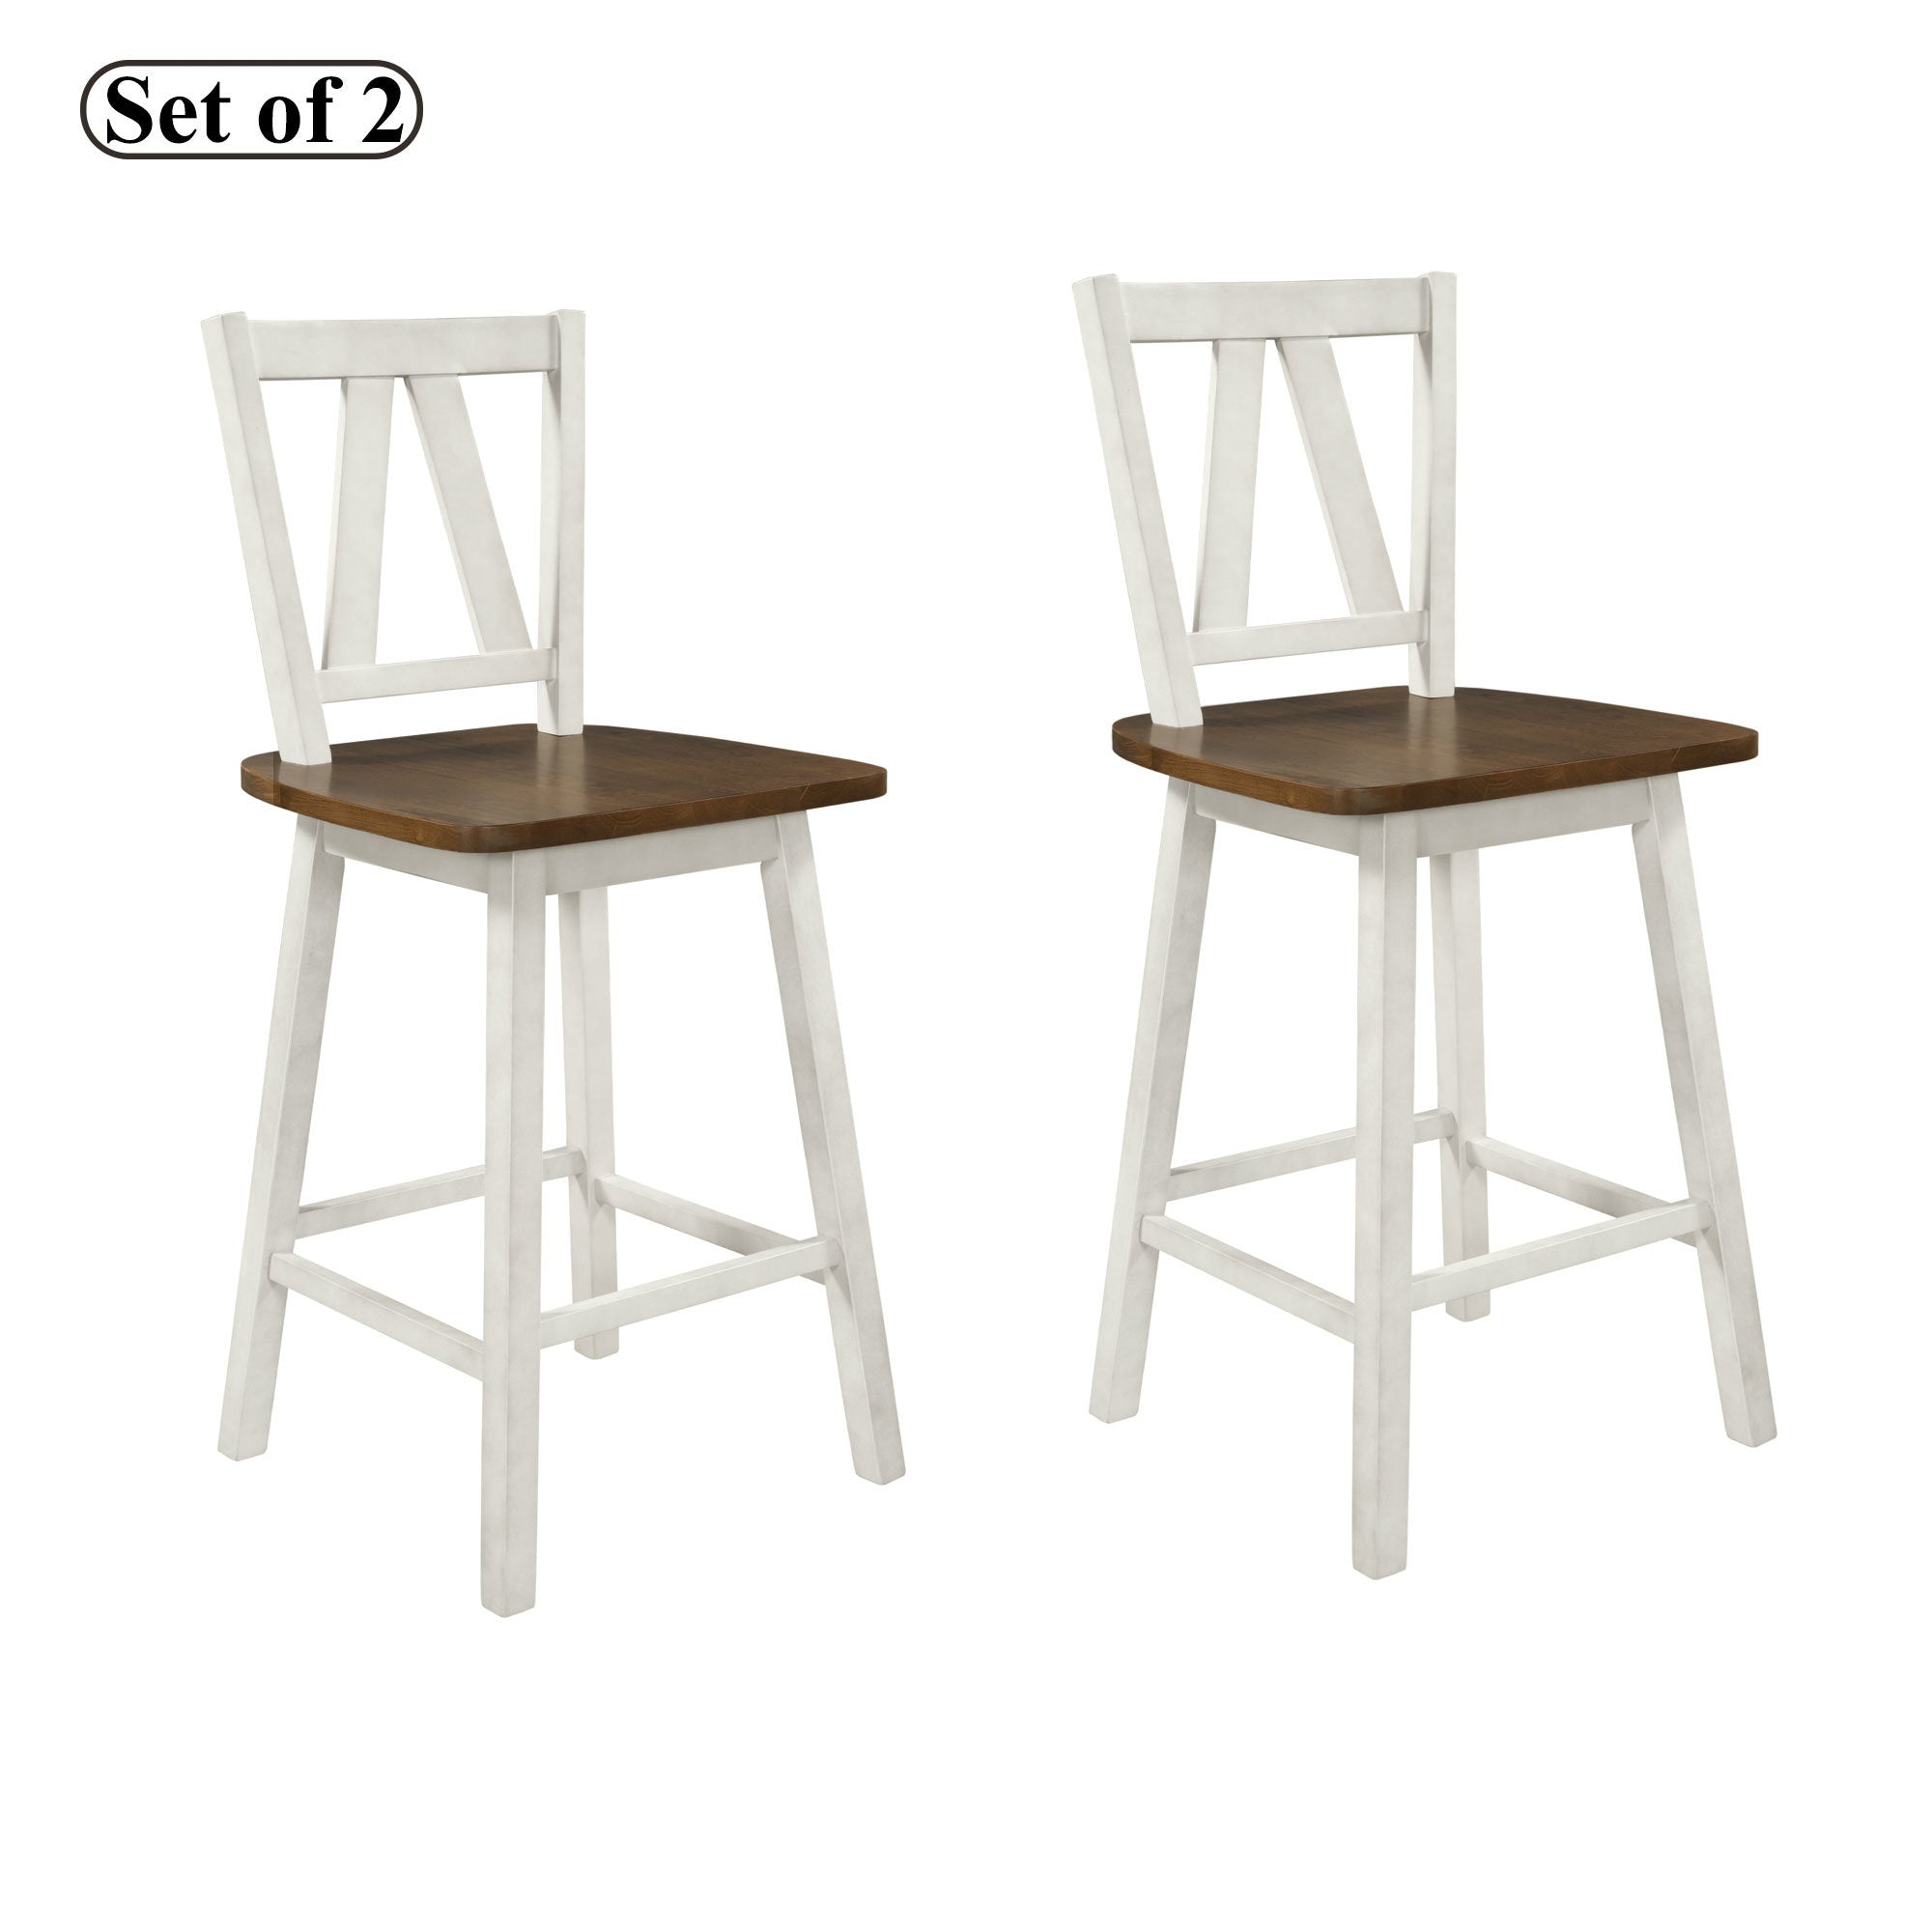 Two Farmhouse 2-Piece Counter Height Dining Chairs with white frames in a modern room with a decorative fireplace and farmhouse decor.